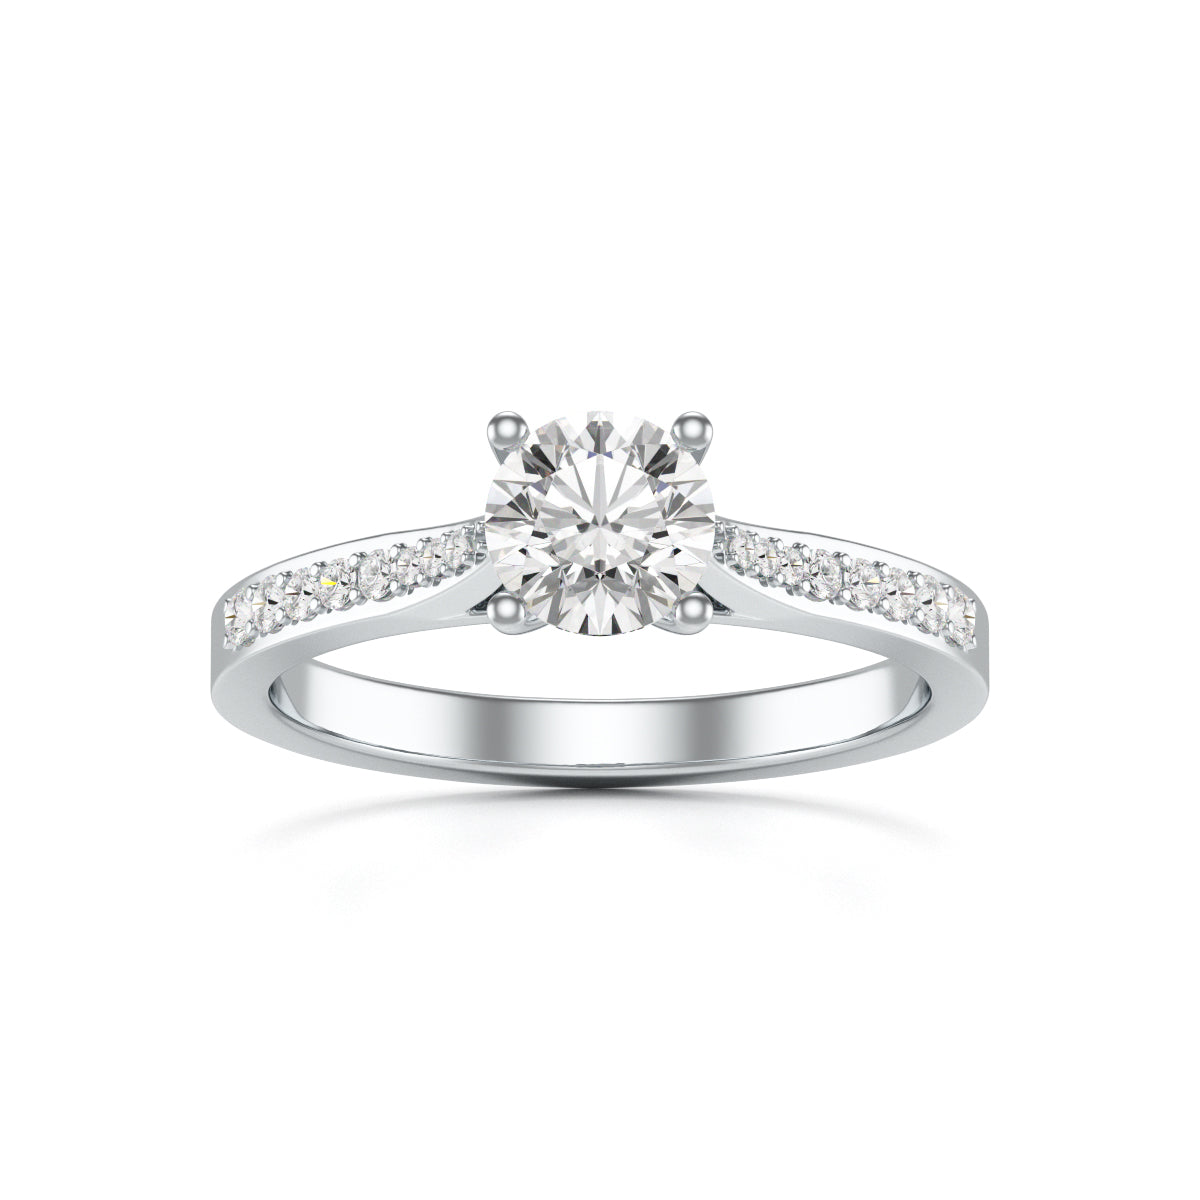 Diamond Engagement Ring- Round Four Claw Tapered Set Shoulders